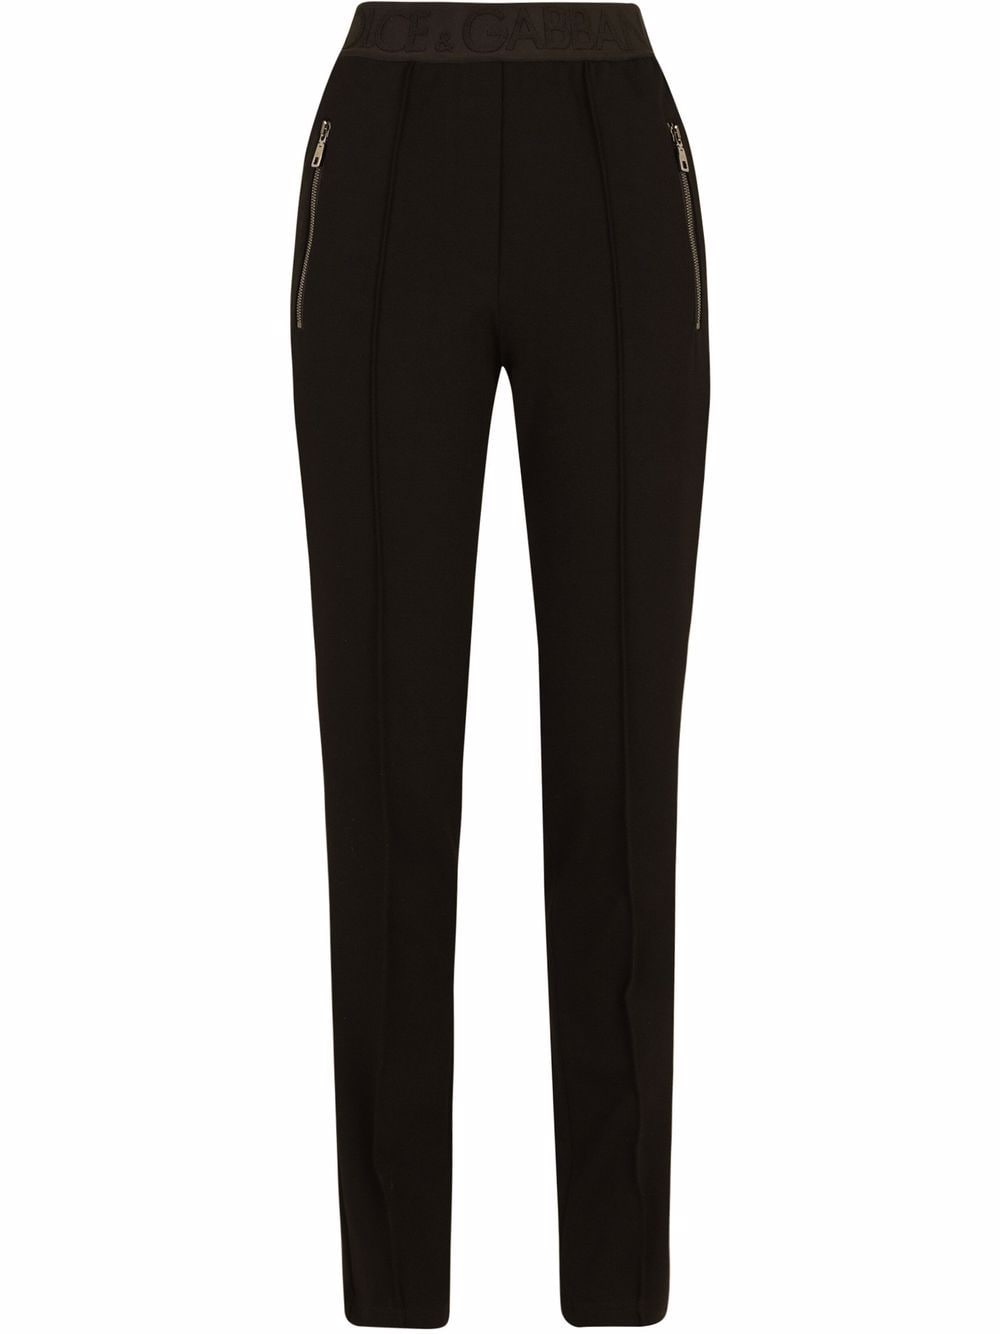 compare prices Dolce & Gabbana Skinny Grey Trouser Pants